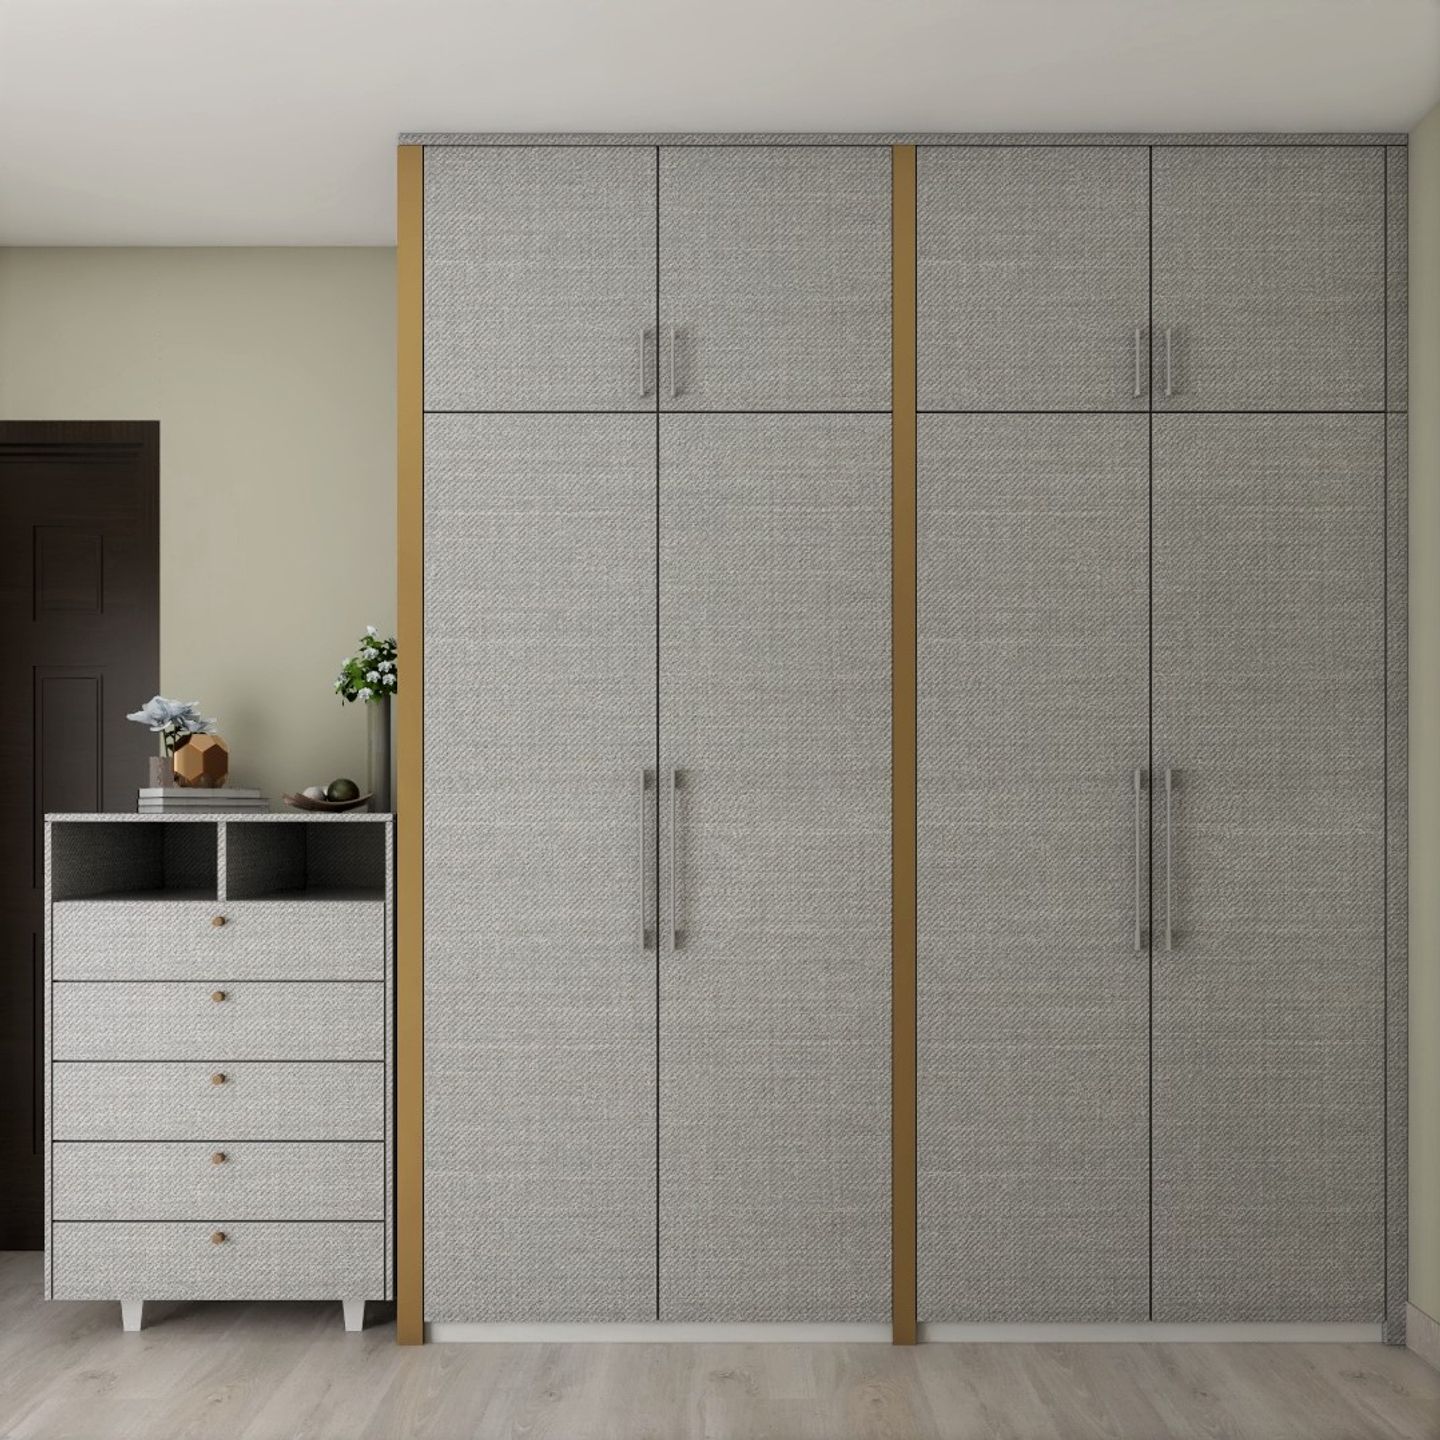 Mixed Laminated Hinged Modern Wardrobe Design with Loft and Mirror - Livspace